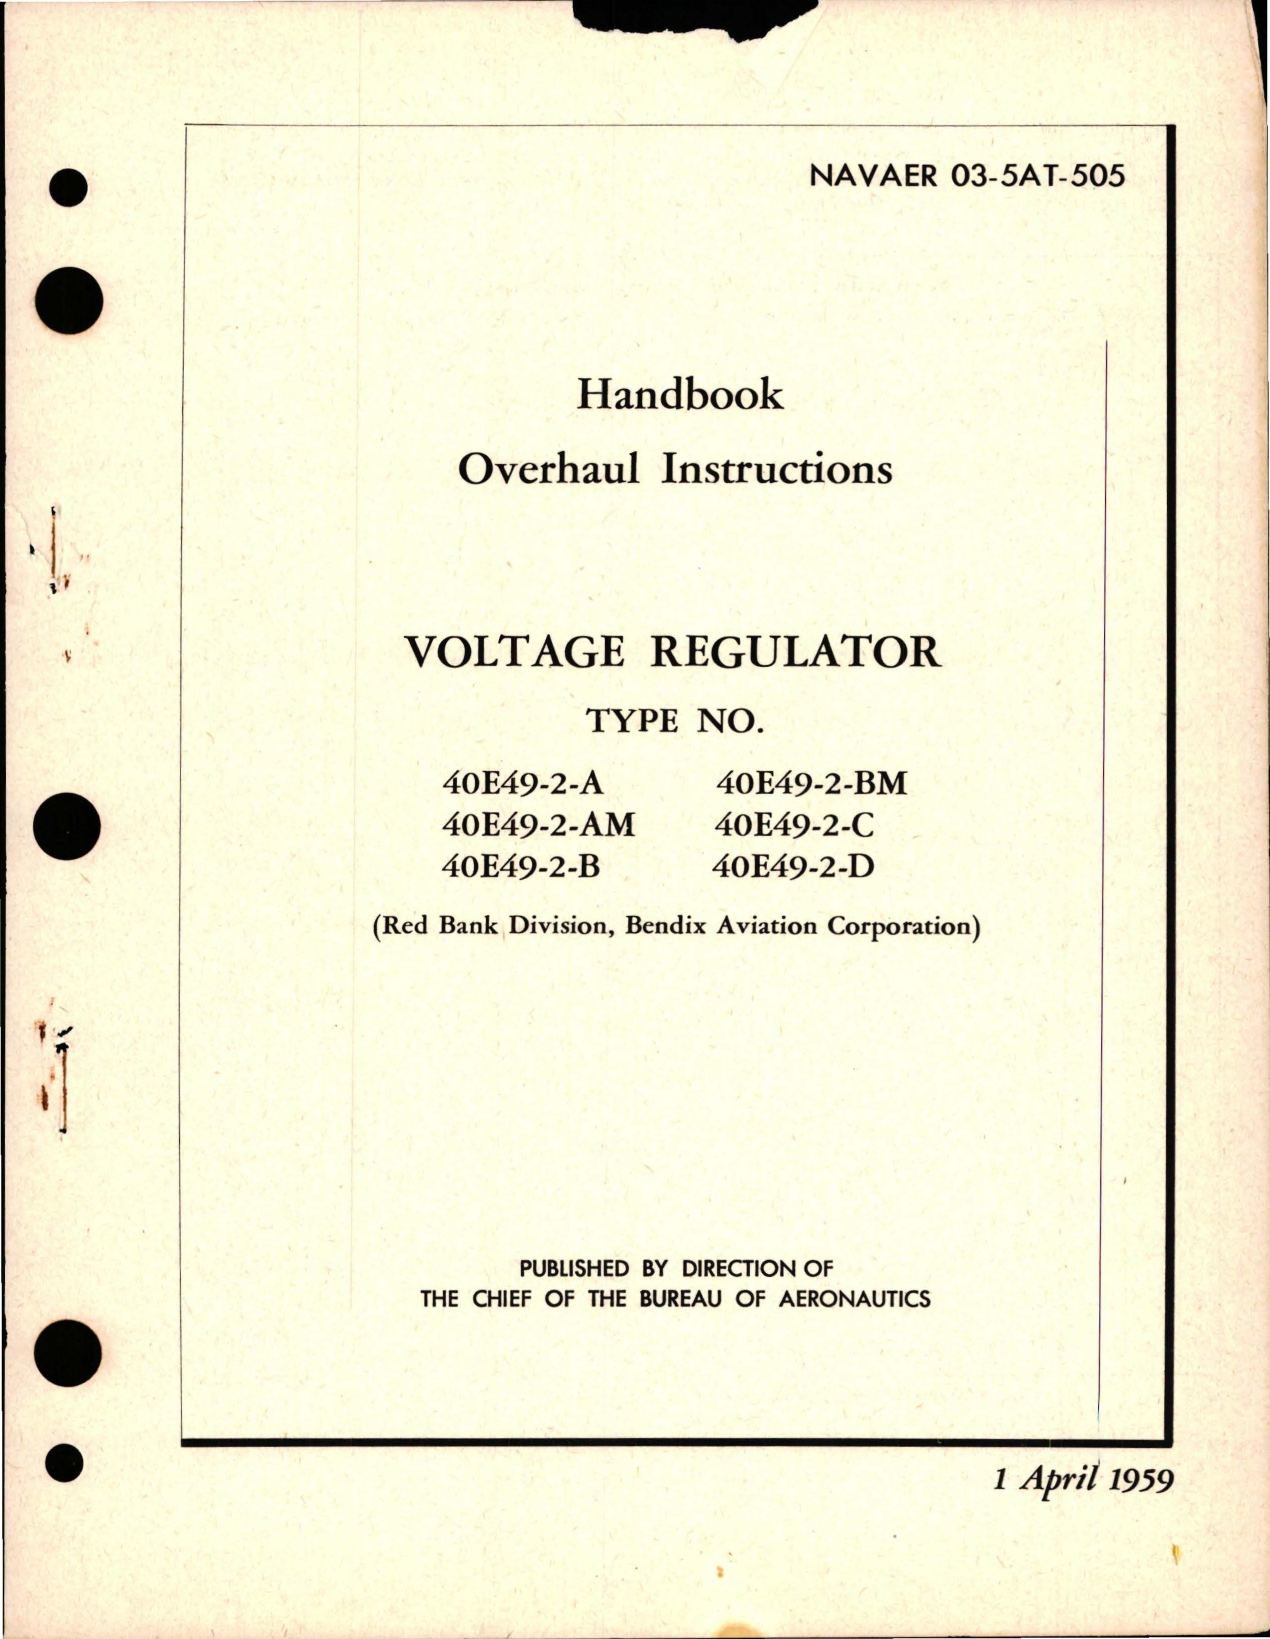 Sample page 1 from AirCorps Library document: Overhaul Instructions for Voltage Regulator 